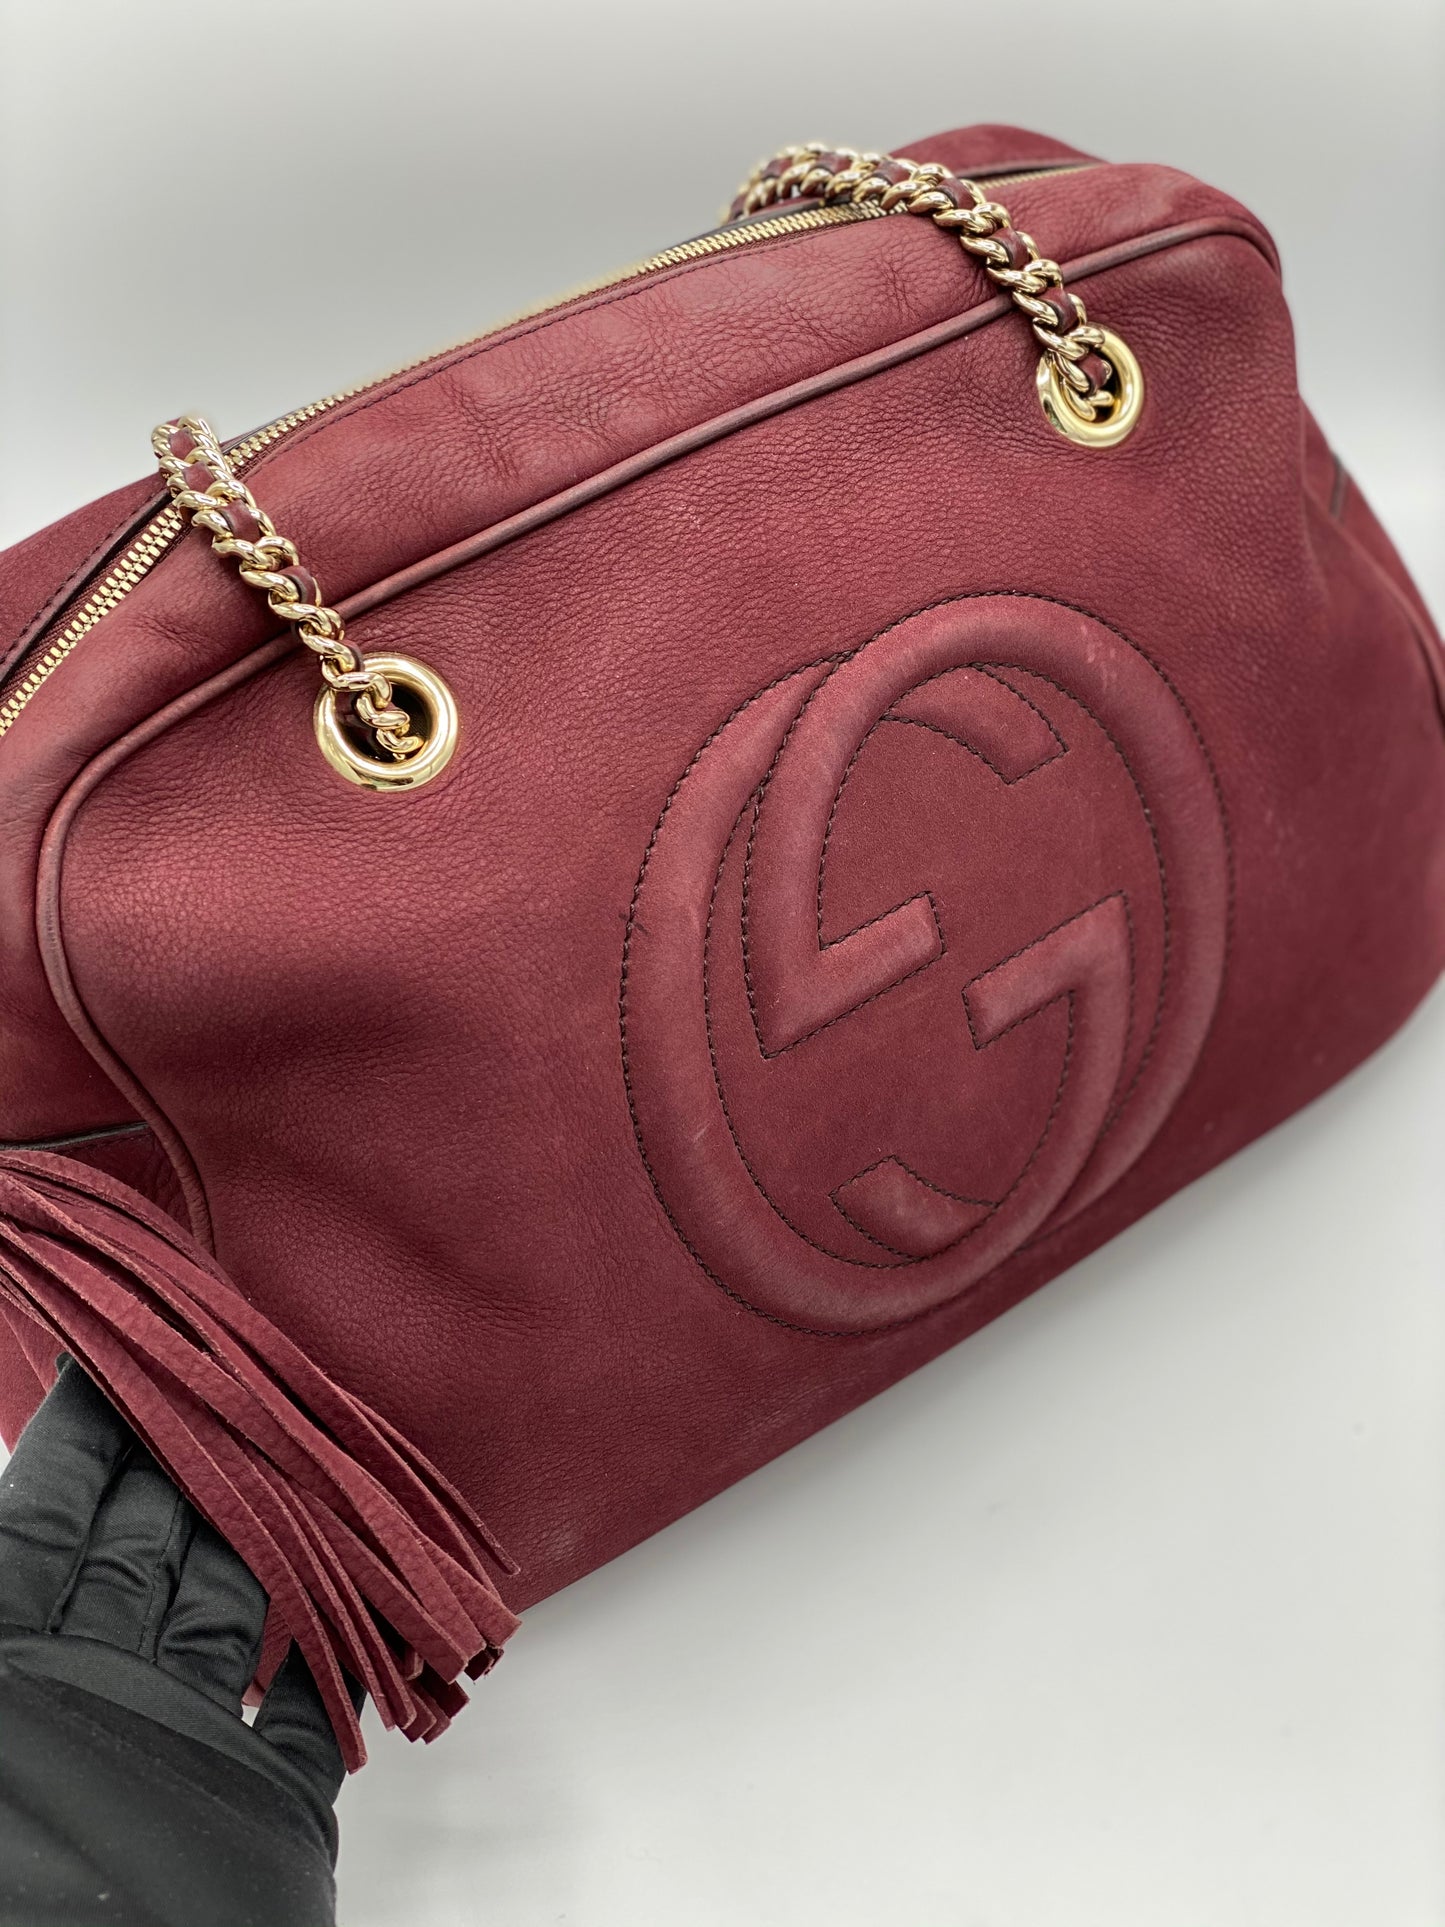 Cartera Gucci Pebbled Bloomingdale's Limited Edition